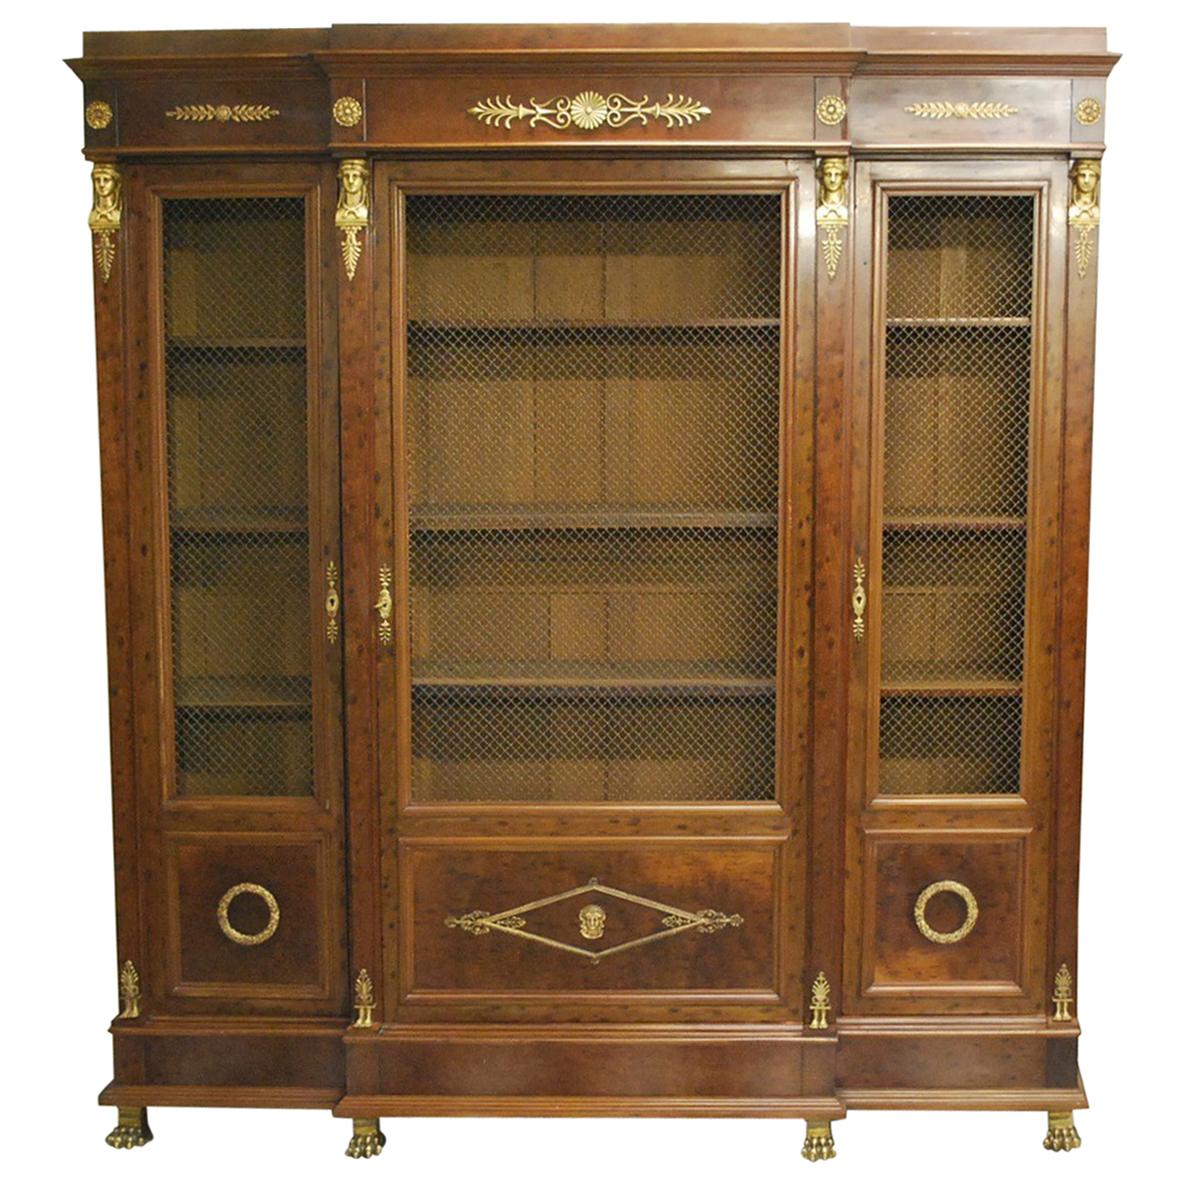 Antique Mahogany French Empire Period Breakfront Bookcase or Bibliotheque For Sale